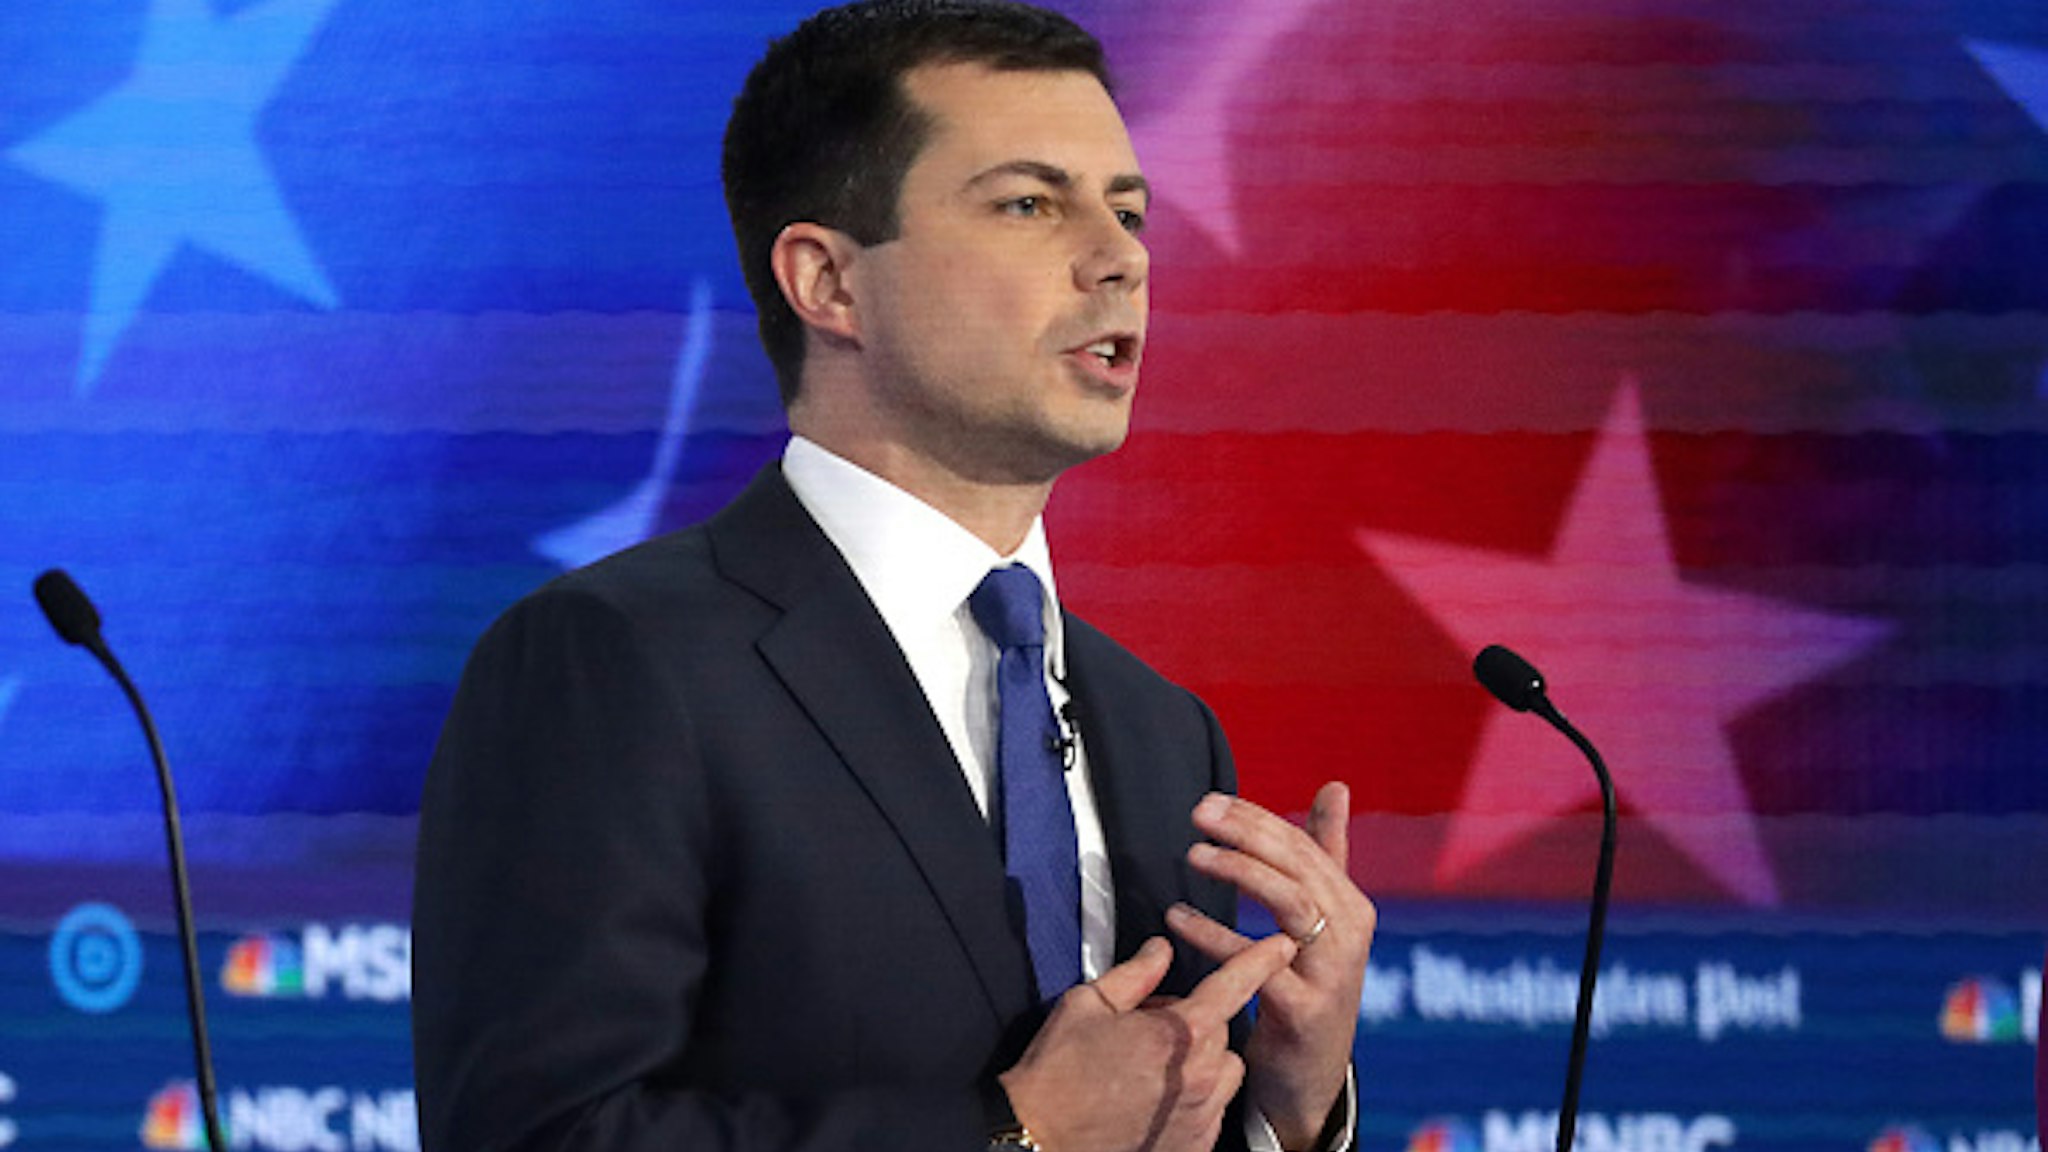 ATLANTA, GEORGIA - NOVEMBER 20: Democratic presidential candidate South Bend, Indiana Mayor Pete Buttigieg speaks during the Democratic Presidential Debate at Tyler Perry Studios November 20, 2019 in Atlanta, Georgia. Ten Democratic presidential hopefuls were chosen from the larger field of candidates to participate in the debate hosted by MSNBC and The Washington Post.